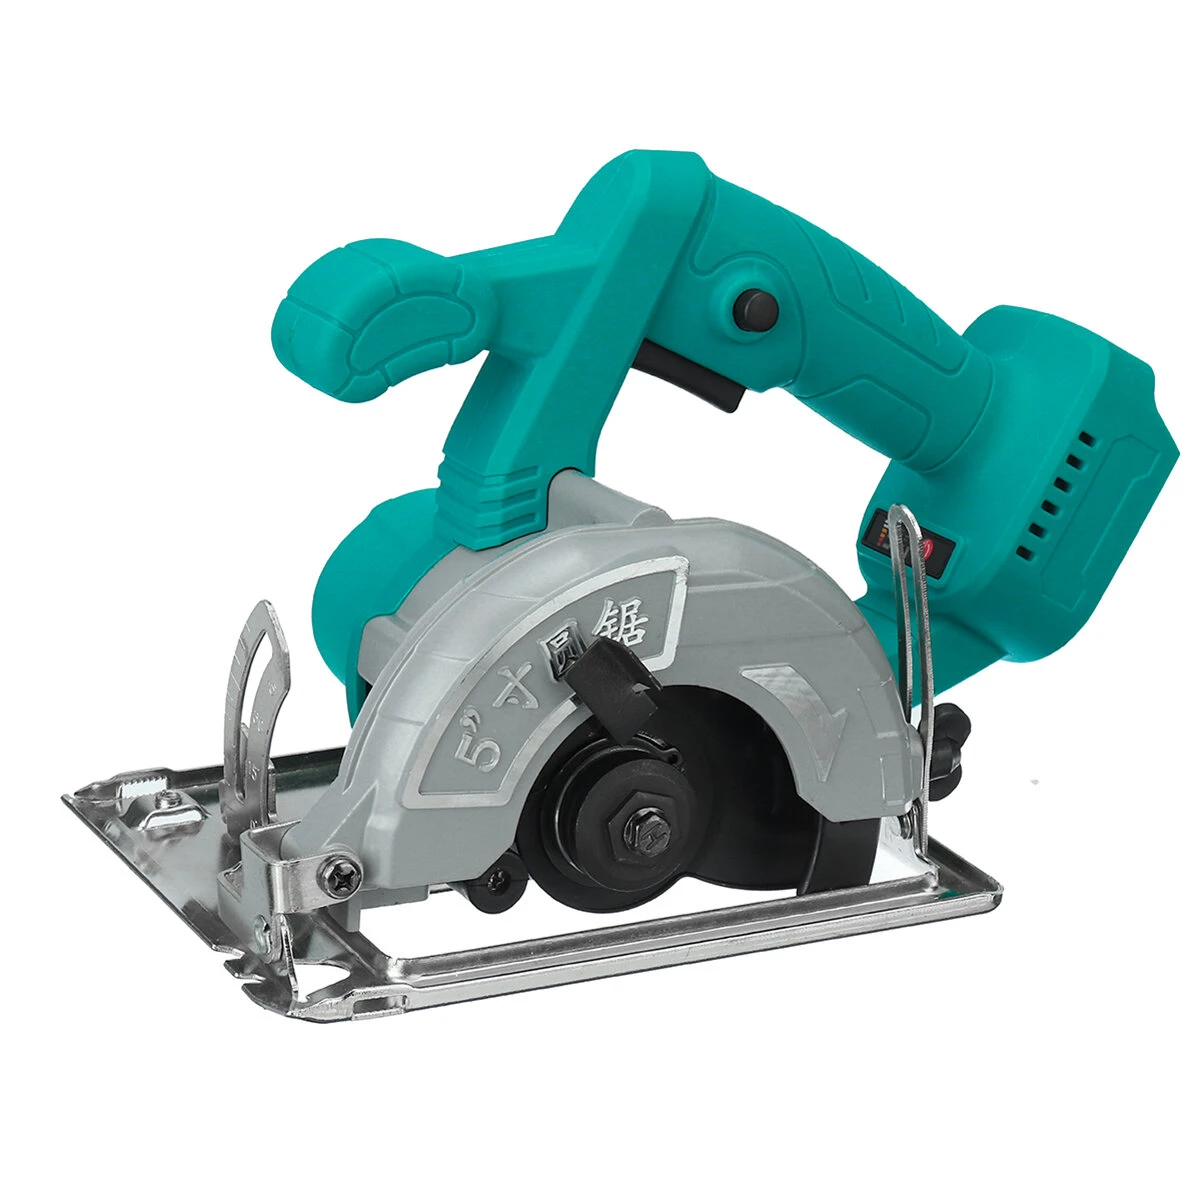 18V Portable Brushless Electric Circular Saw Cutting Machine Woodworking Circular Saw Suitable For Makita Battery